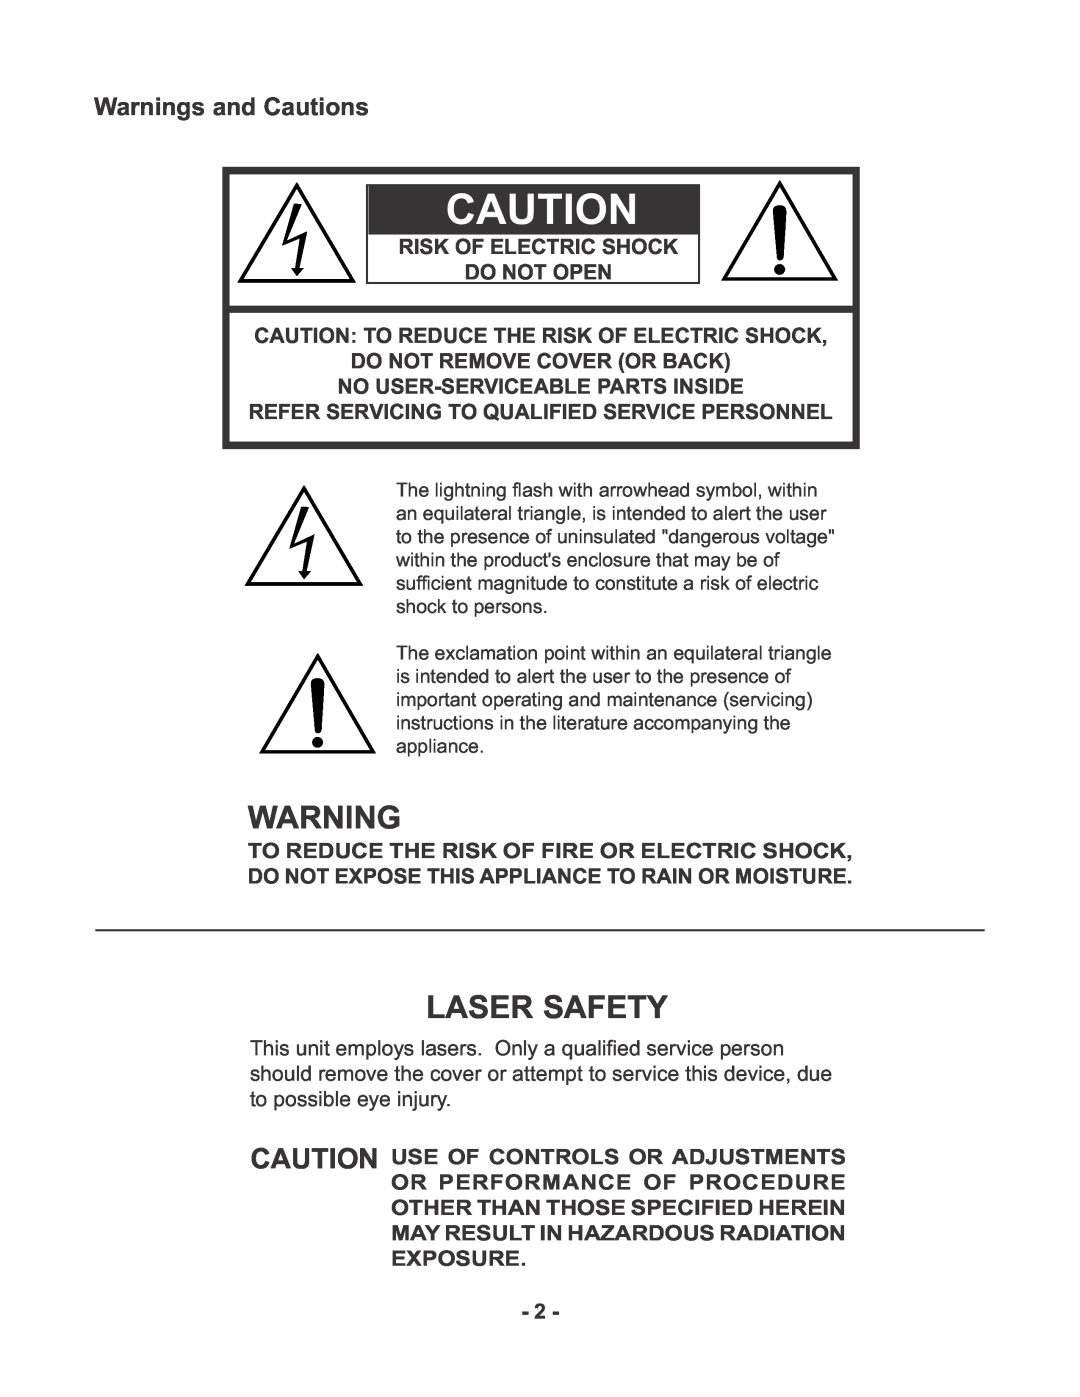 Marantz CDR510 manual Warnings and Cautions, Do Not Open, Do Not Remove Cover Or Back, Laser Safety 